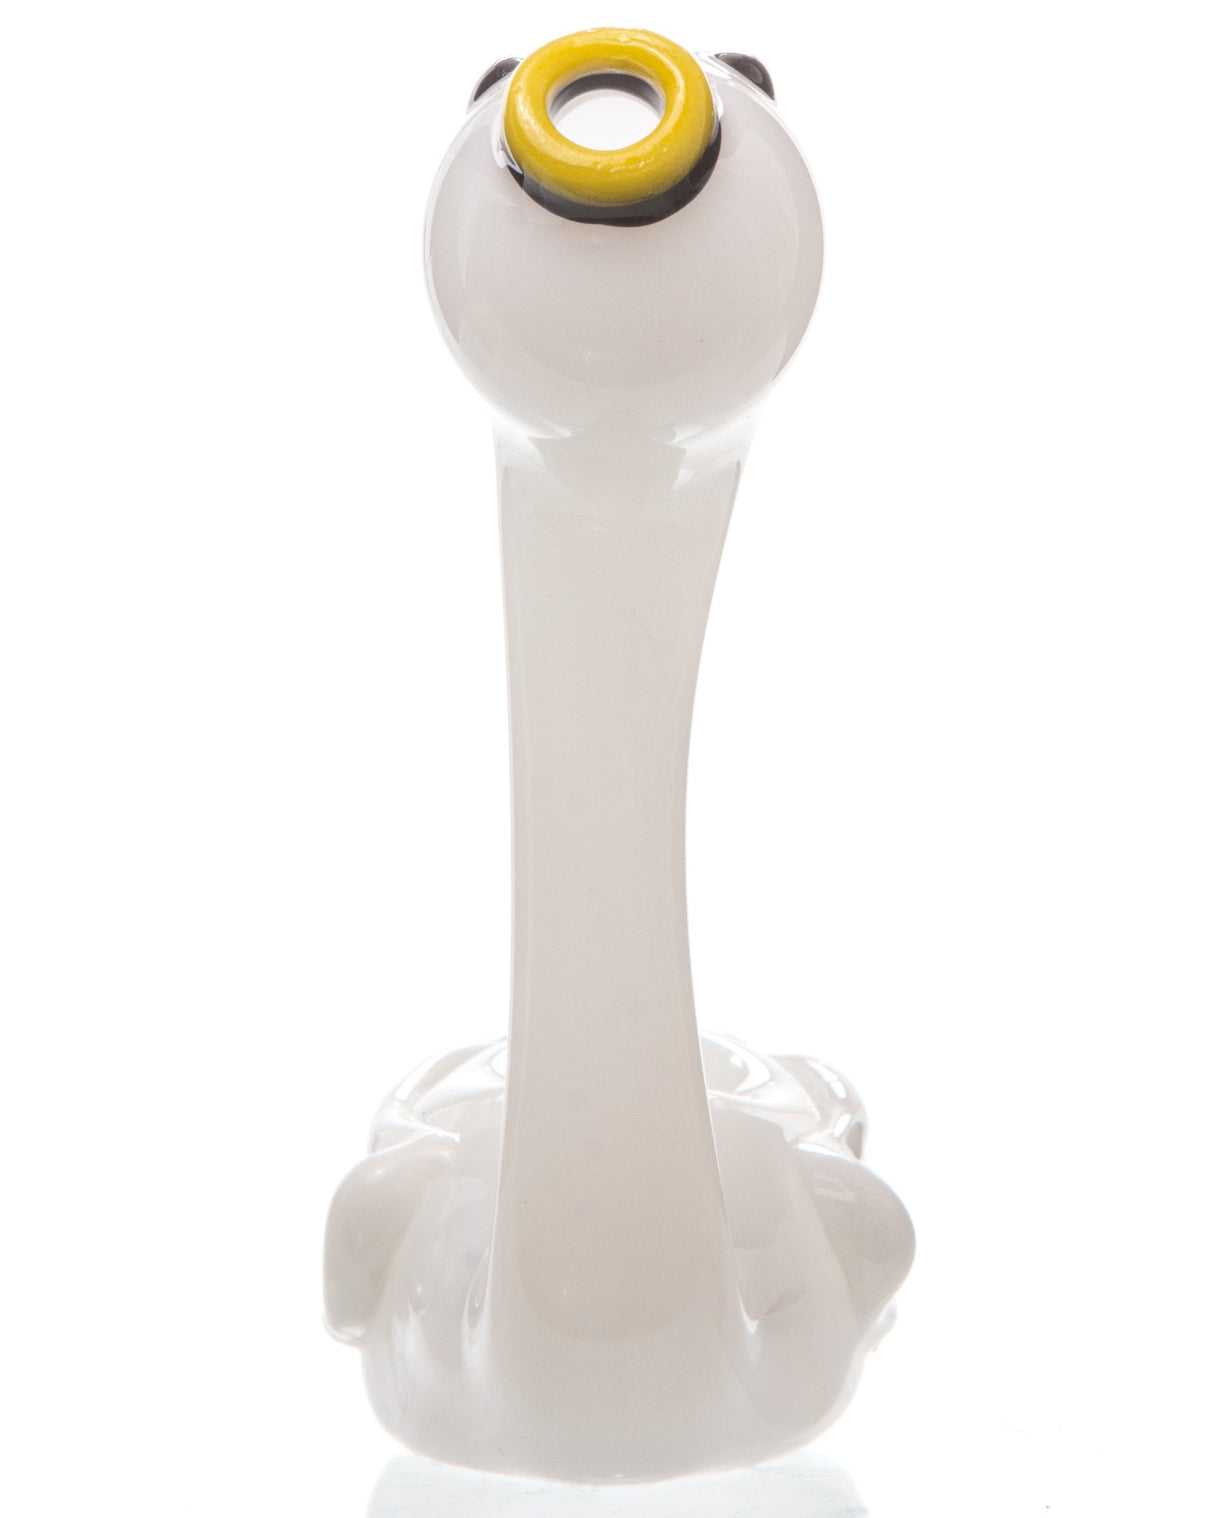 Chameleon Glass Swan Sherlock Pipe in Borosilicate Glass, Front View on White Background